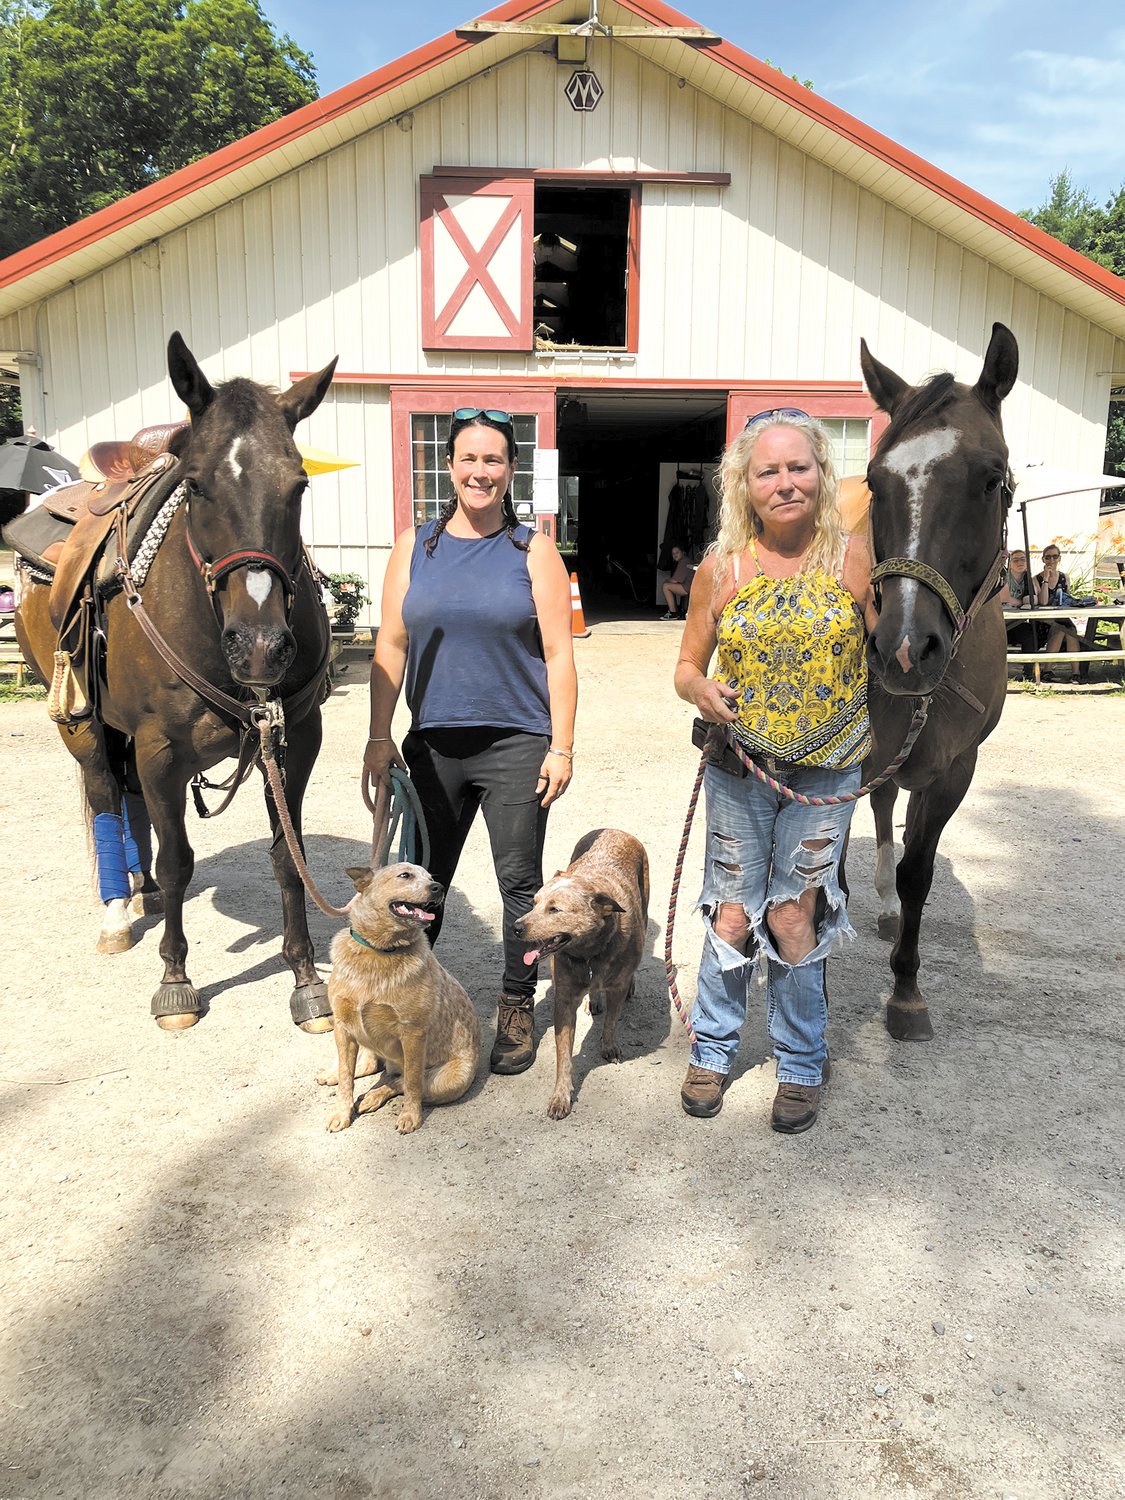 RUNNING THE BUSINESS: Pictured at the Goddard Park stable is Danielle, at left with her horse “Rita” and Lee with her horse “Sista.” The two dogs are Babe and Blue.